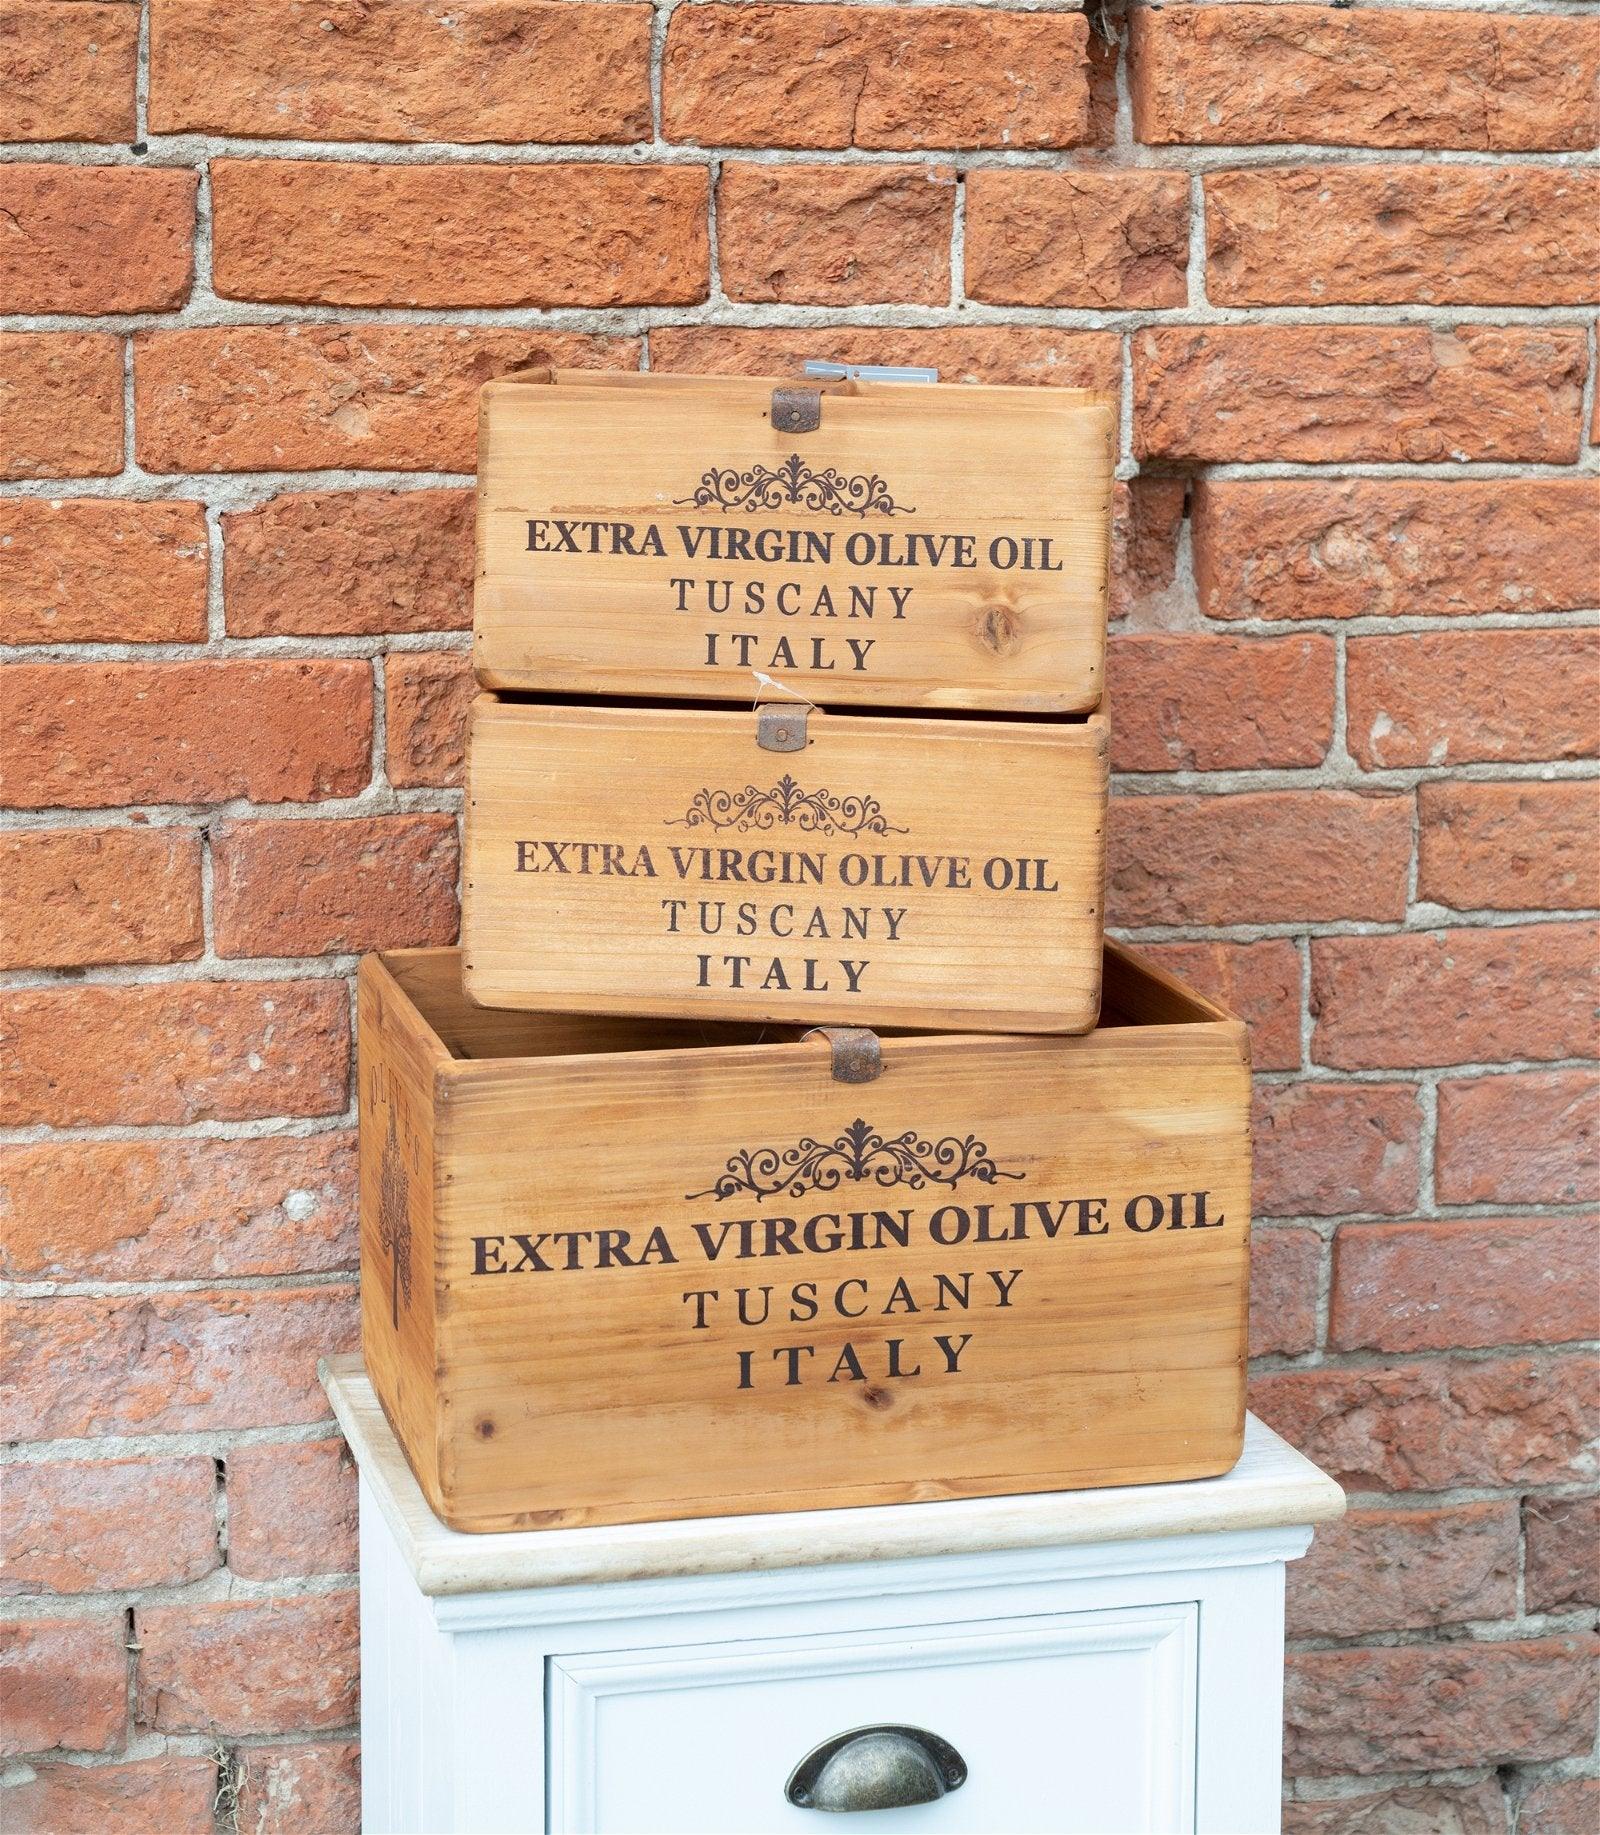 View Set of Three Olive Oil Wooden Crates information